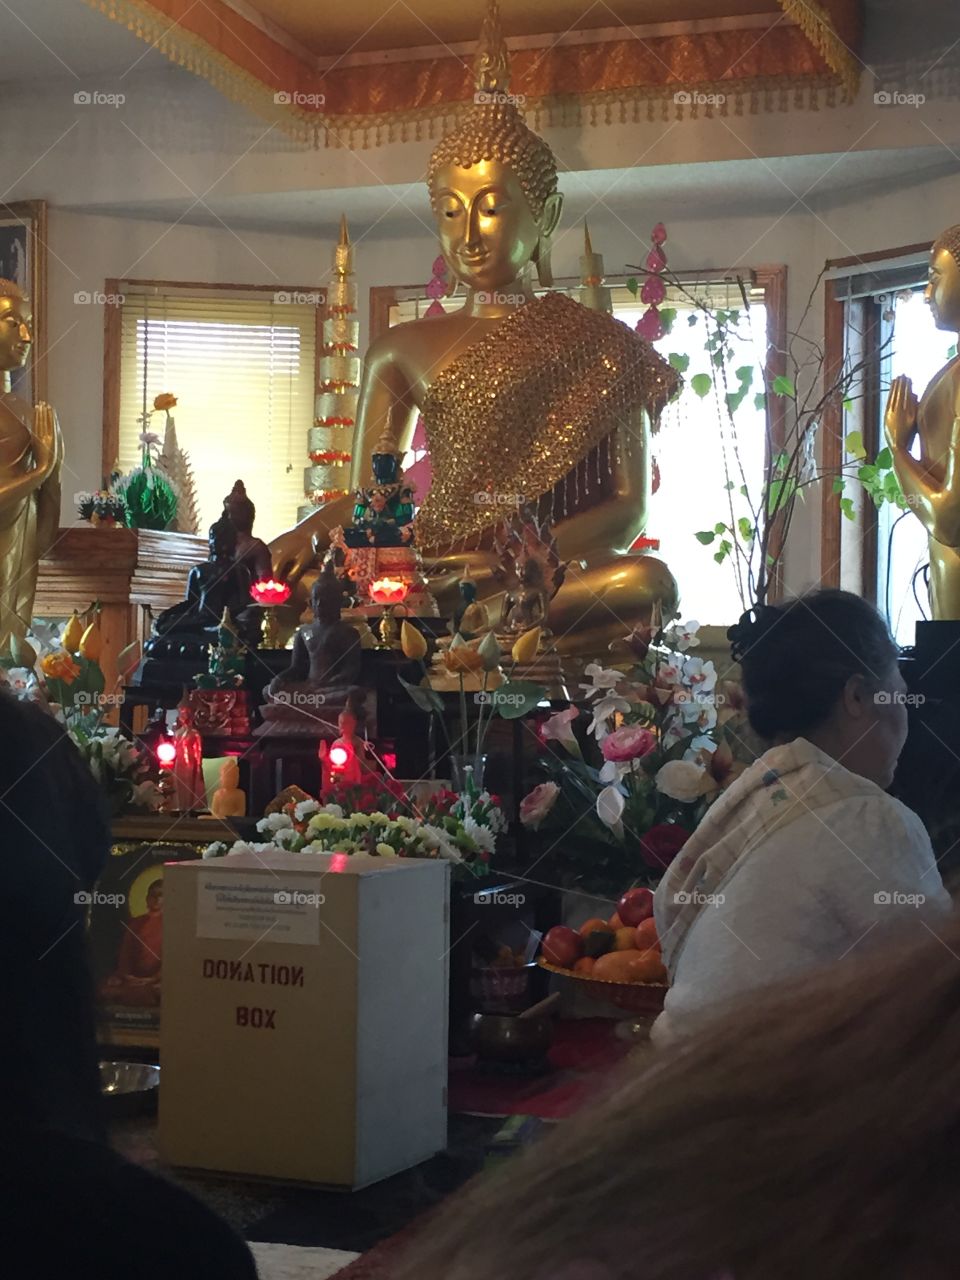 Buddhist temple in MN